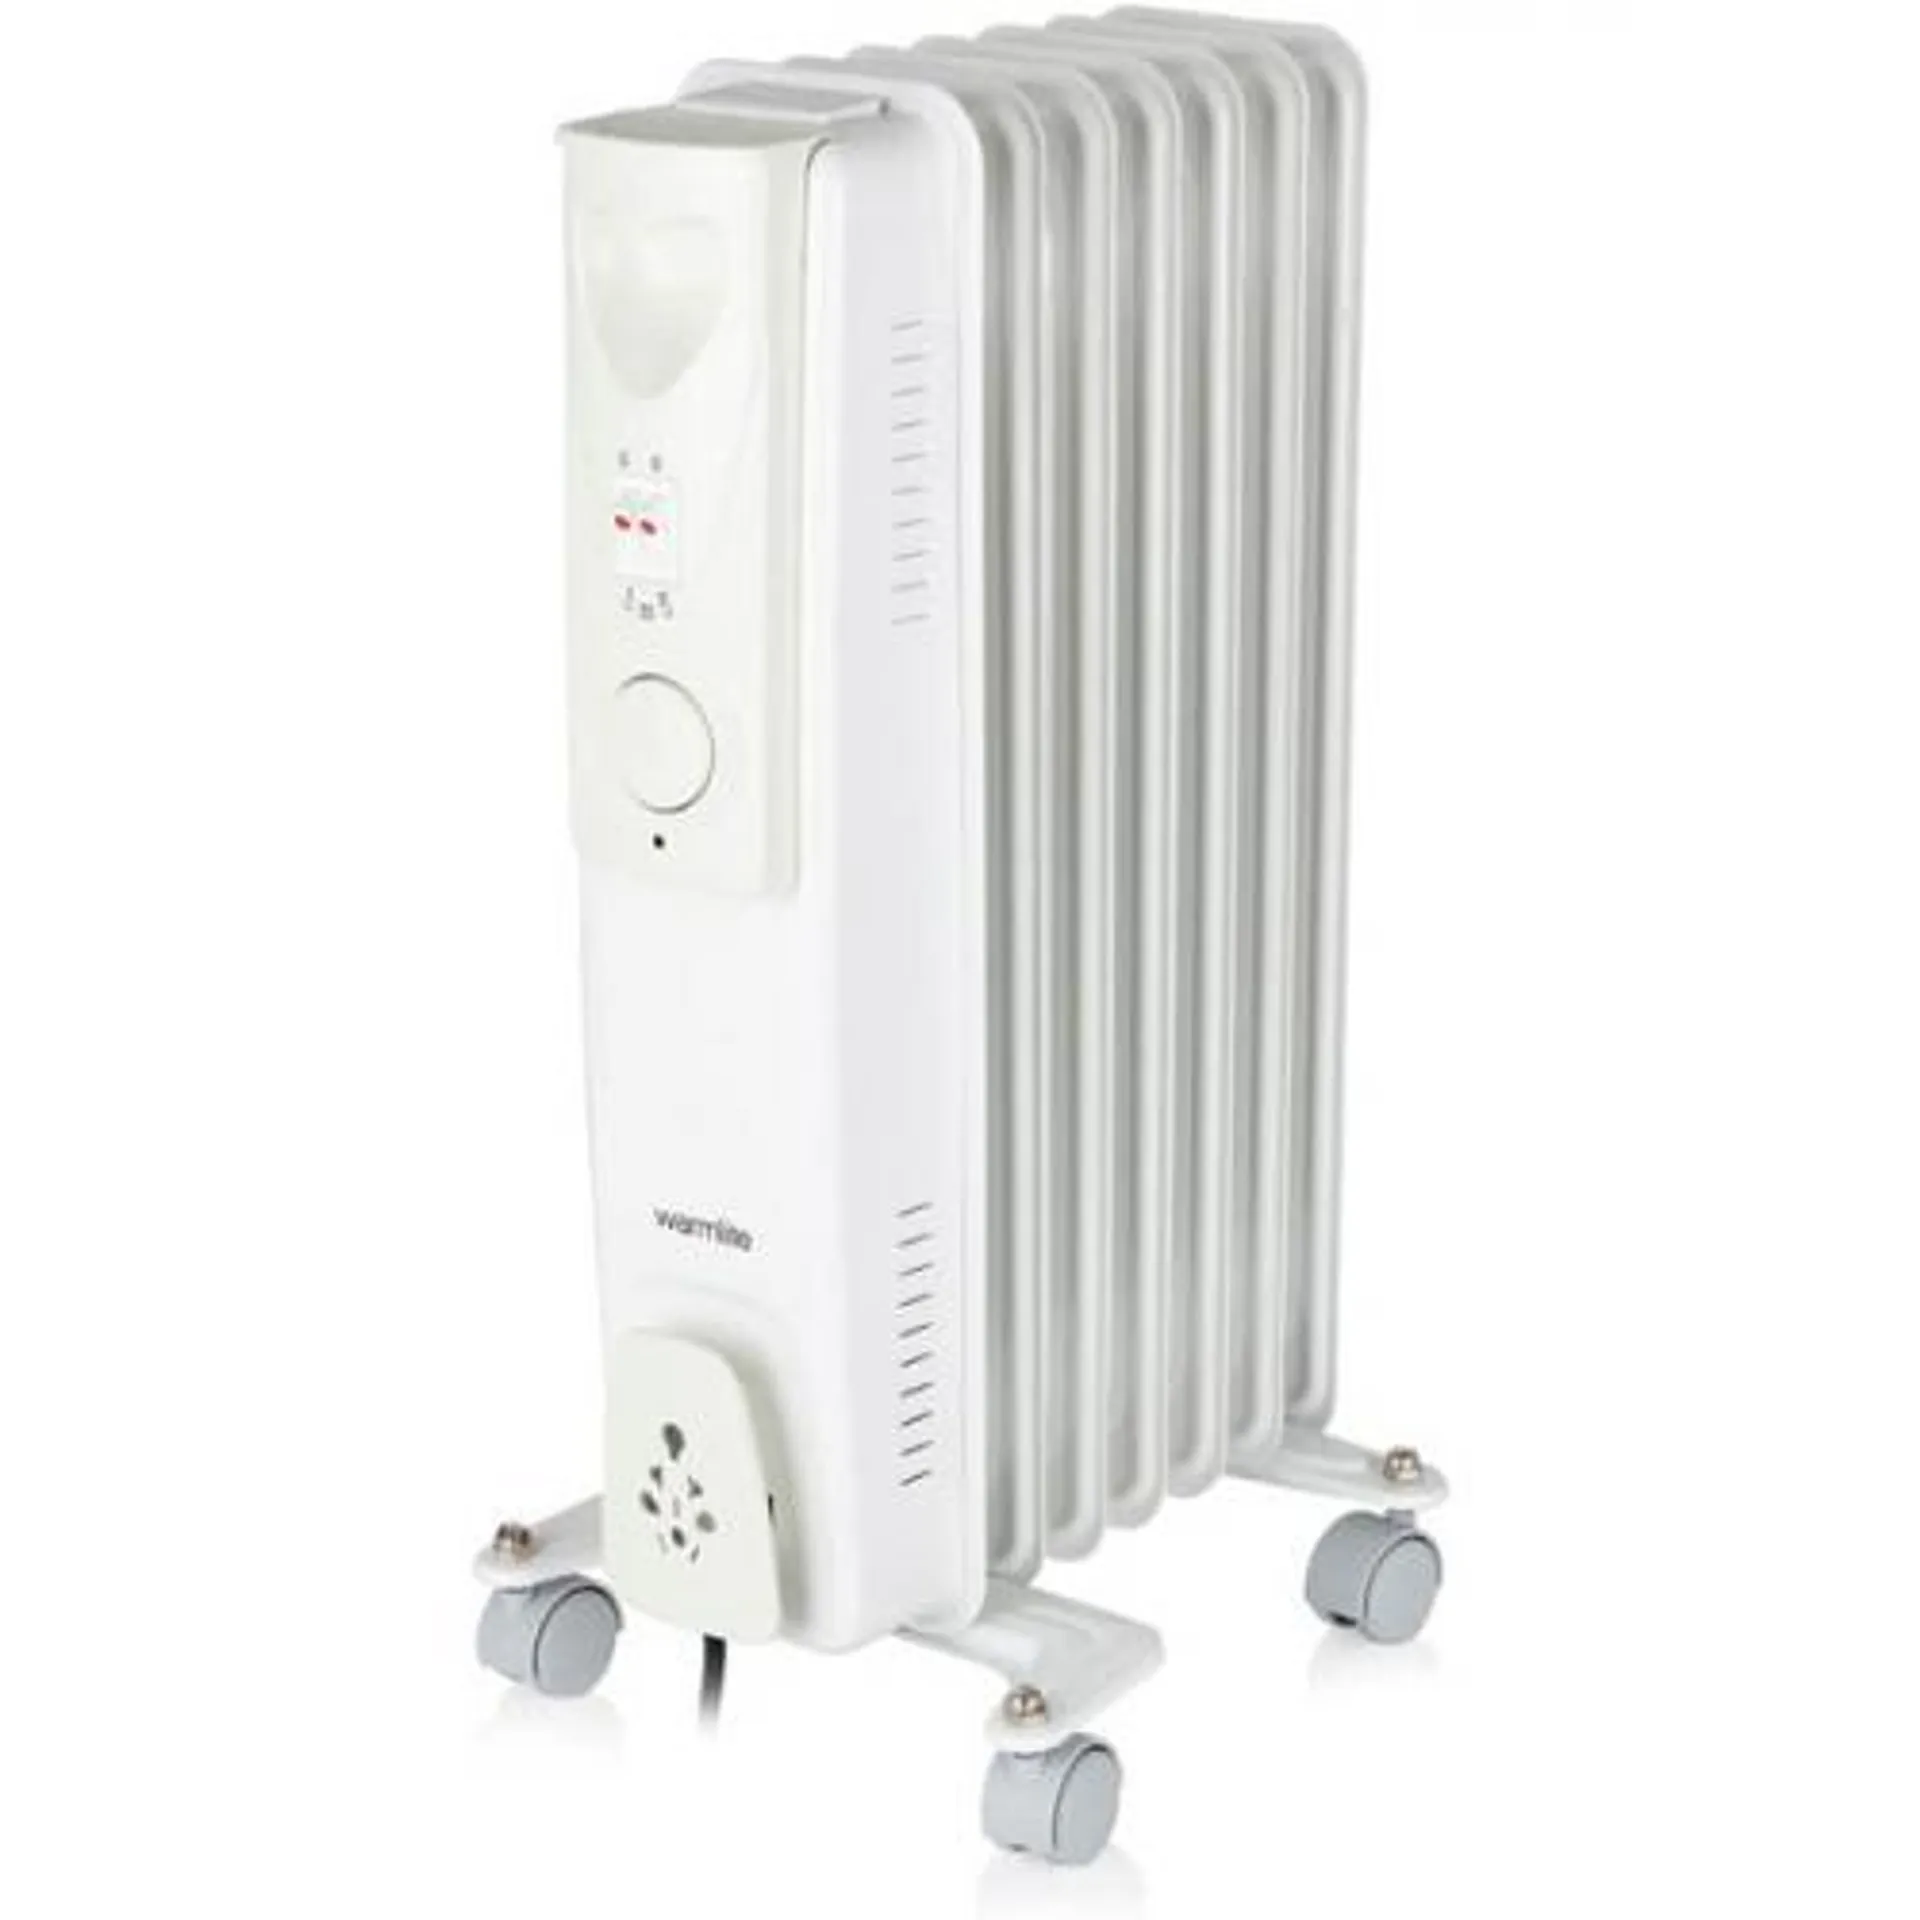 Warmlite WL43003YW 1500W Oil Filled Radiator with 3 Power Settings and Adjustable Thermostat, White